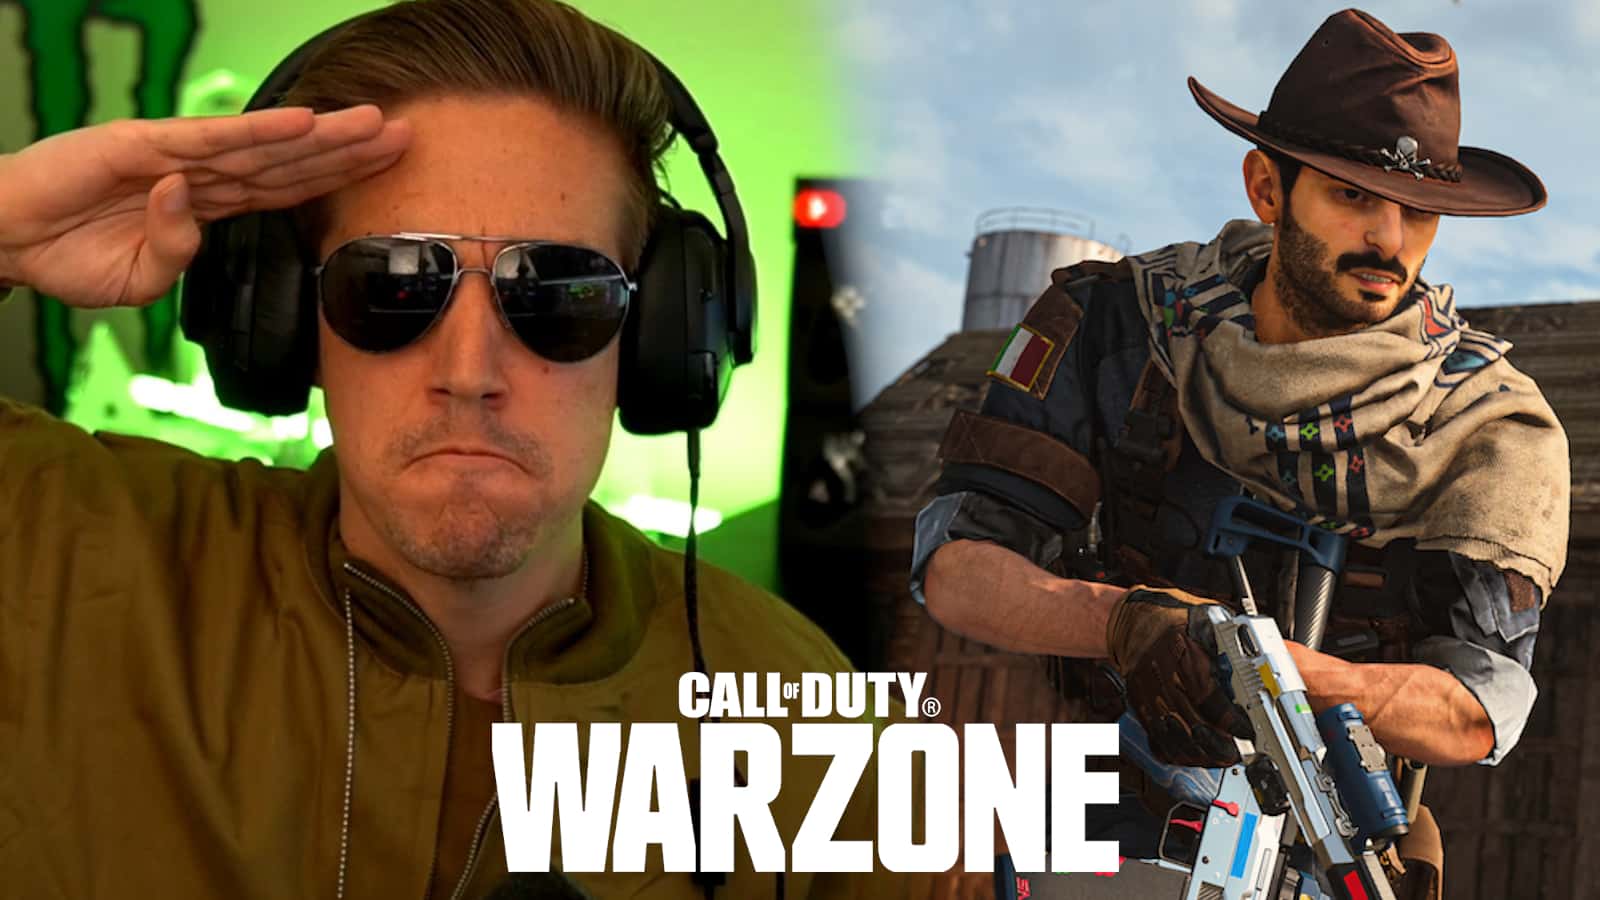 warzone teep villain make players quit game call of duty